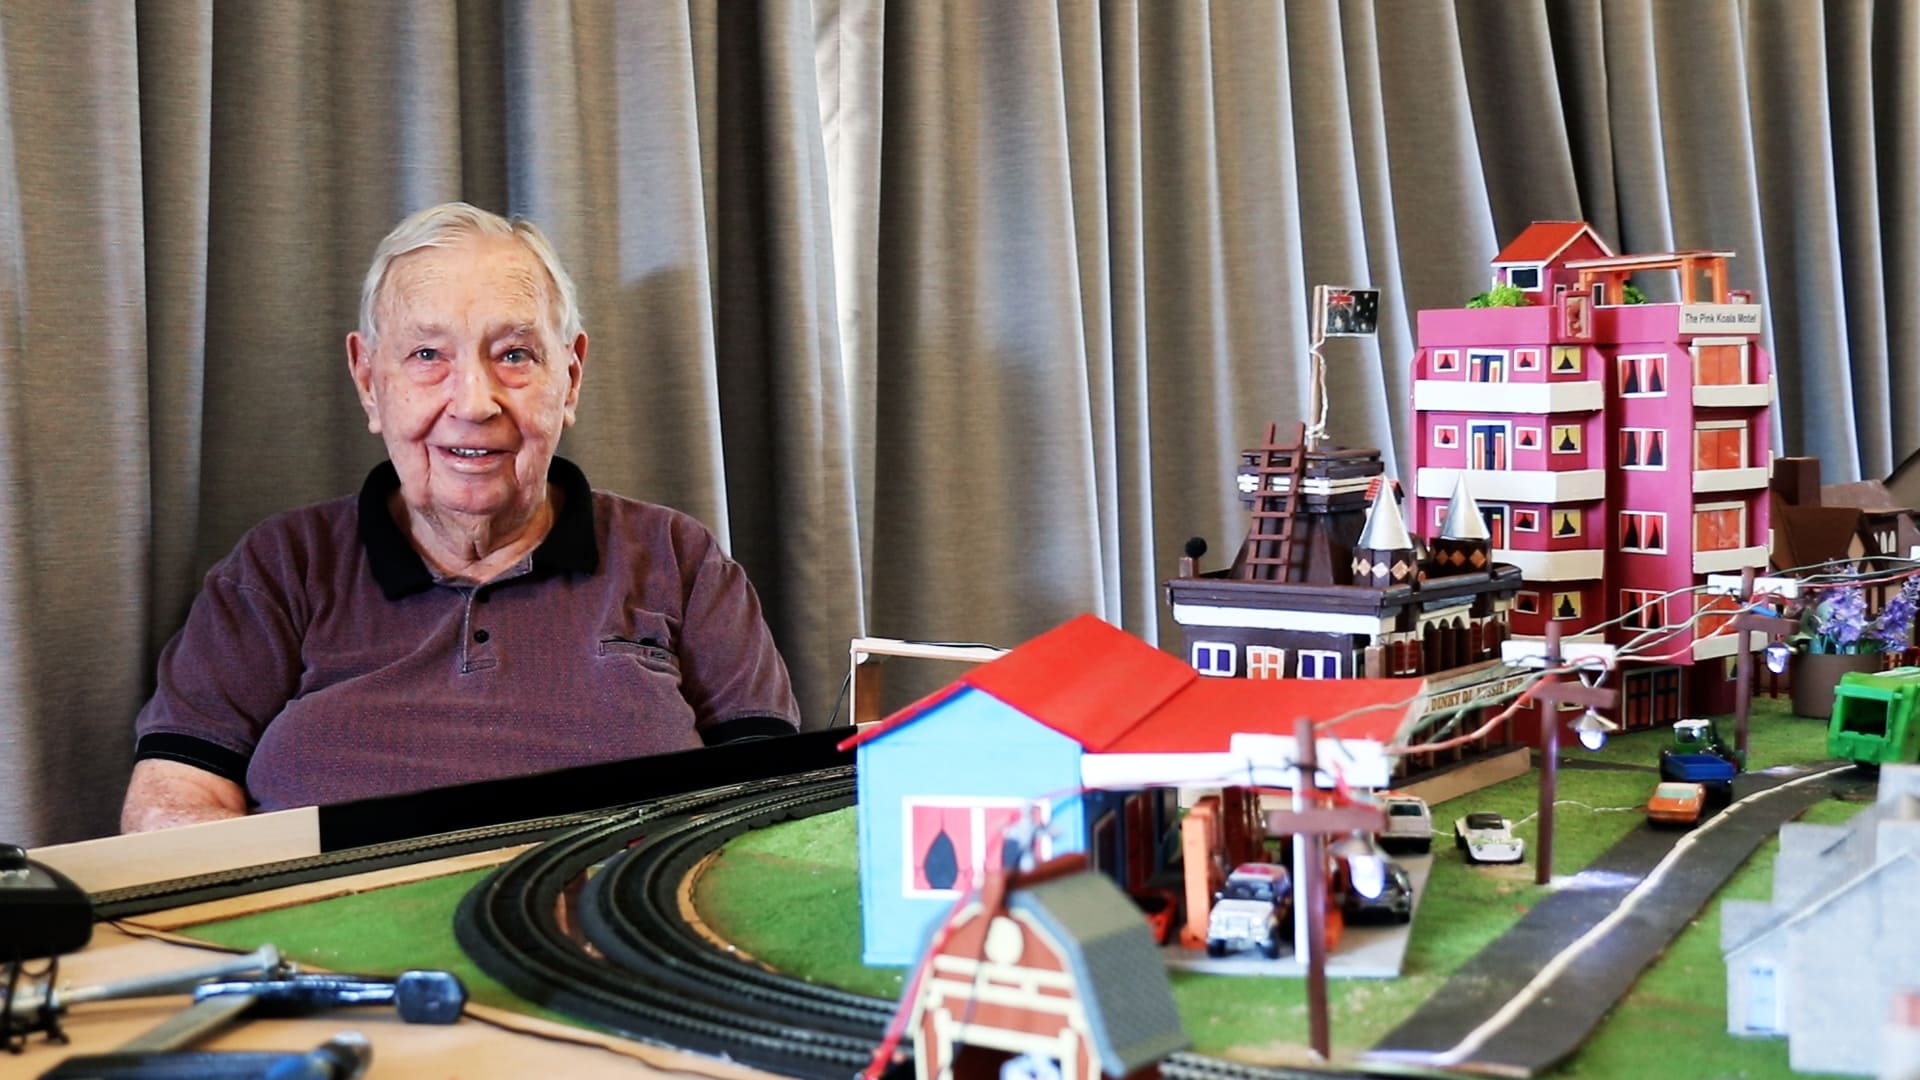 Brian with his model train